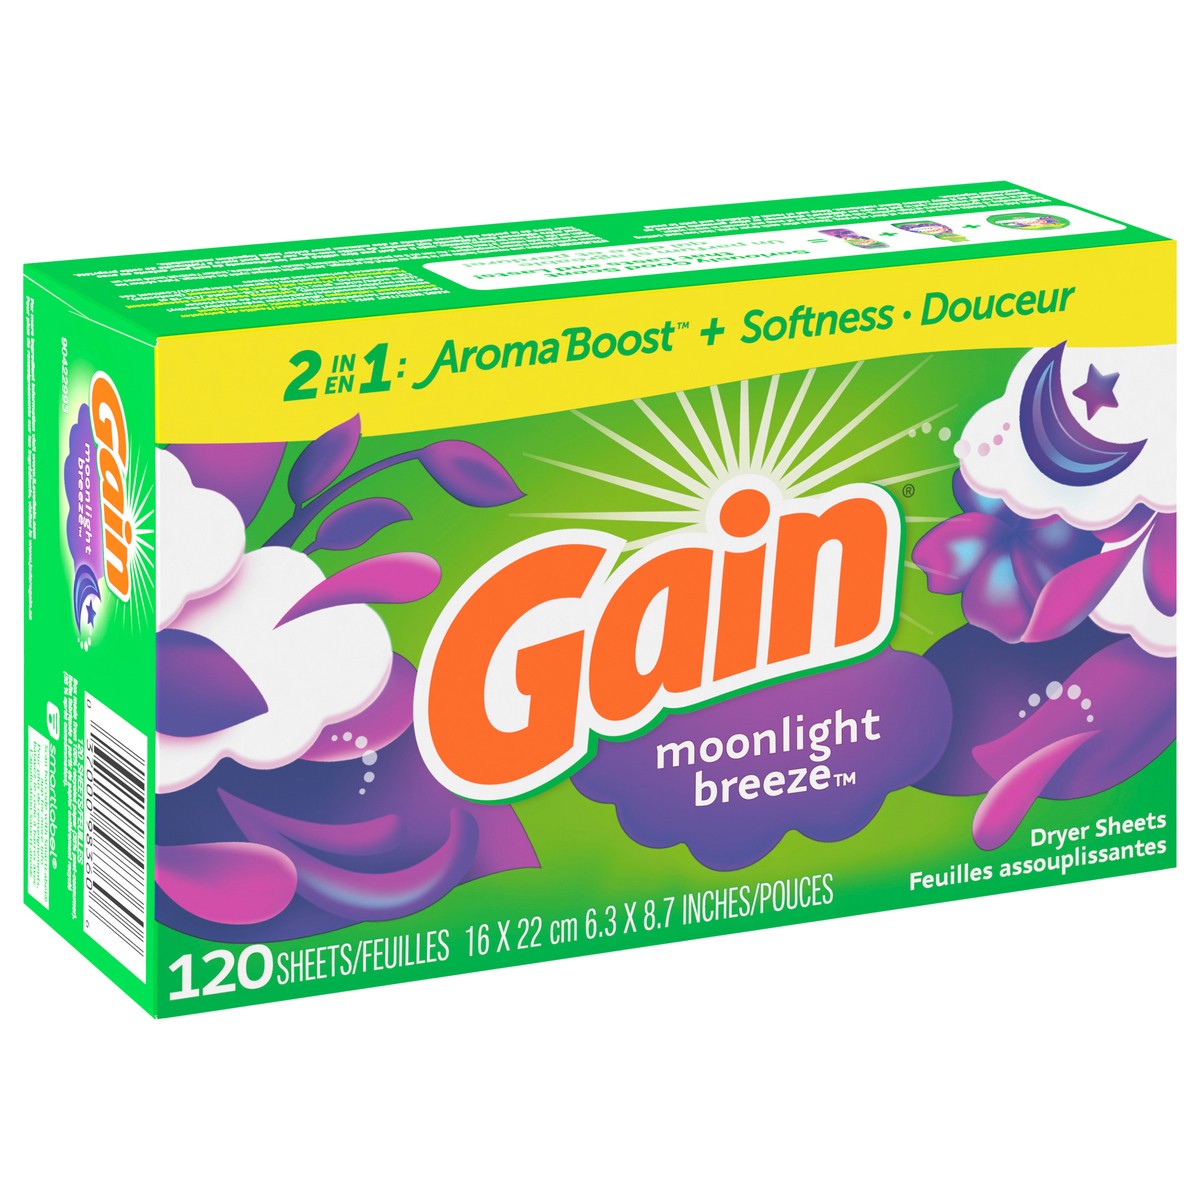 slide 6 of 12, Gain dryer sheets, 120 Count, Moonlight Breeze Scent Laundry Fabric Softener Sheets with 2-in-1 Aromaboost Plus Softness, 120 ct